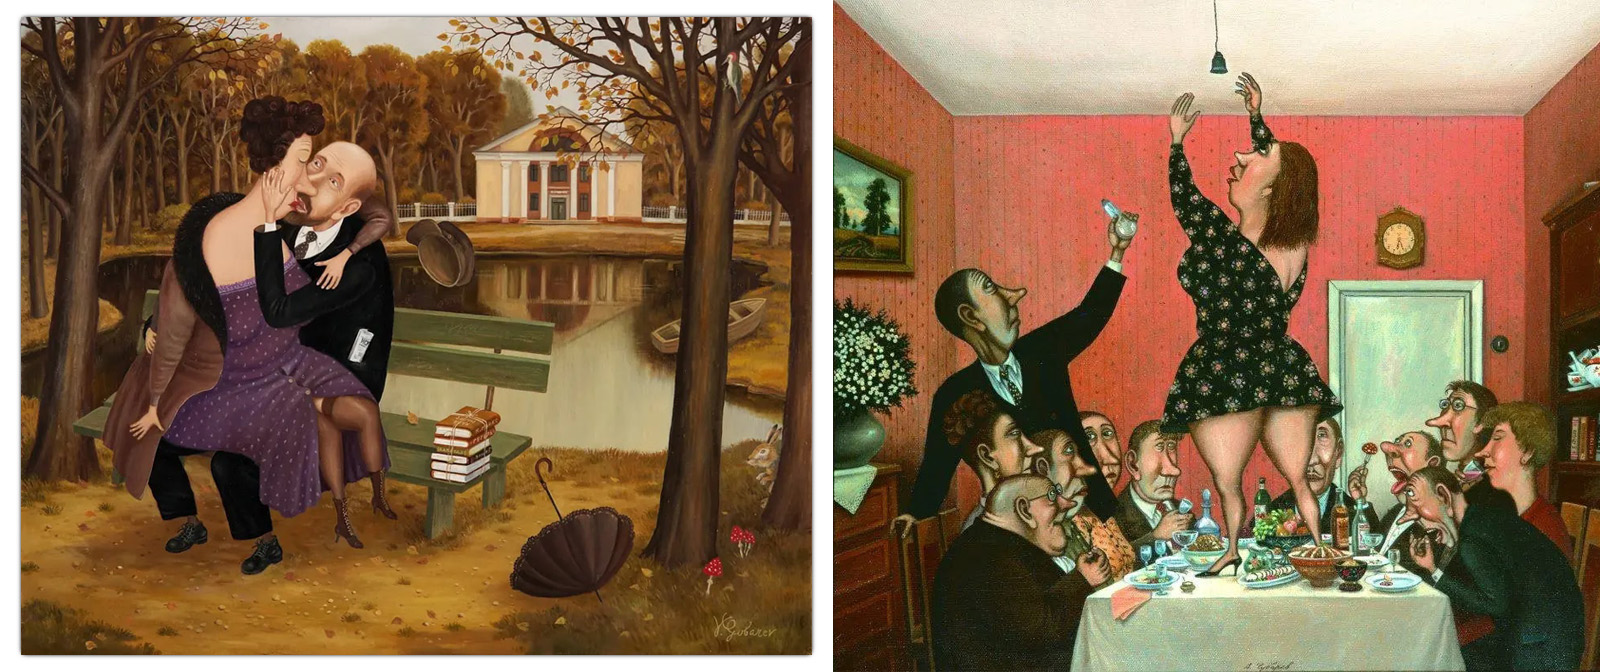 We lived like this. Valentin Gubarev's soulful paintings about ordinary people, causing a feeling of pinching nostalgia. 